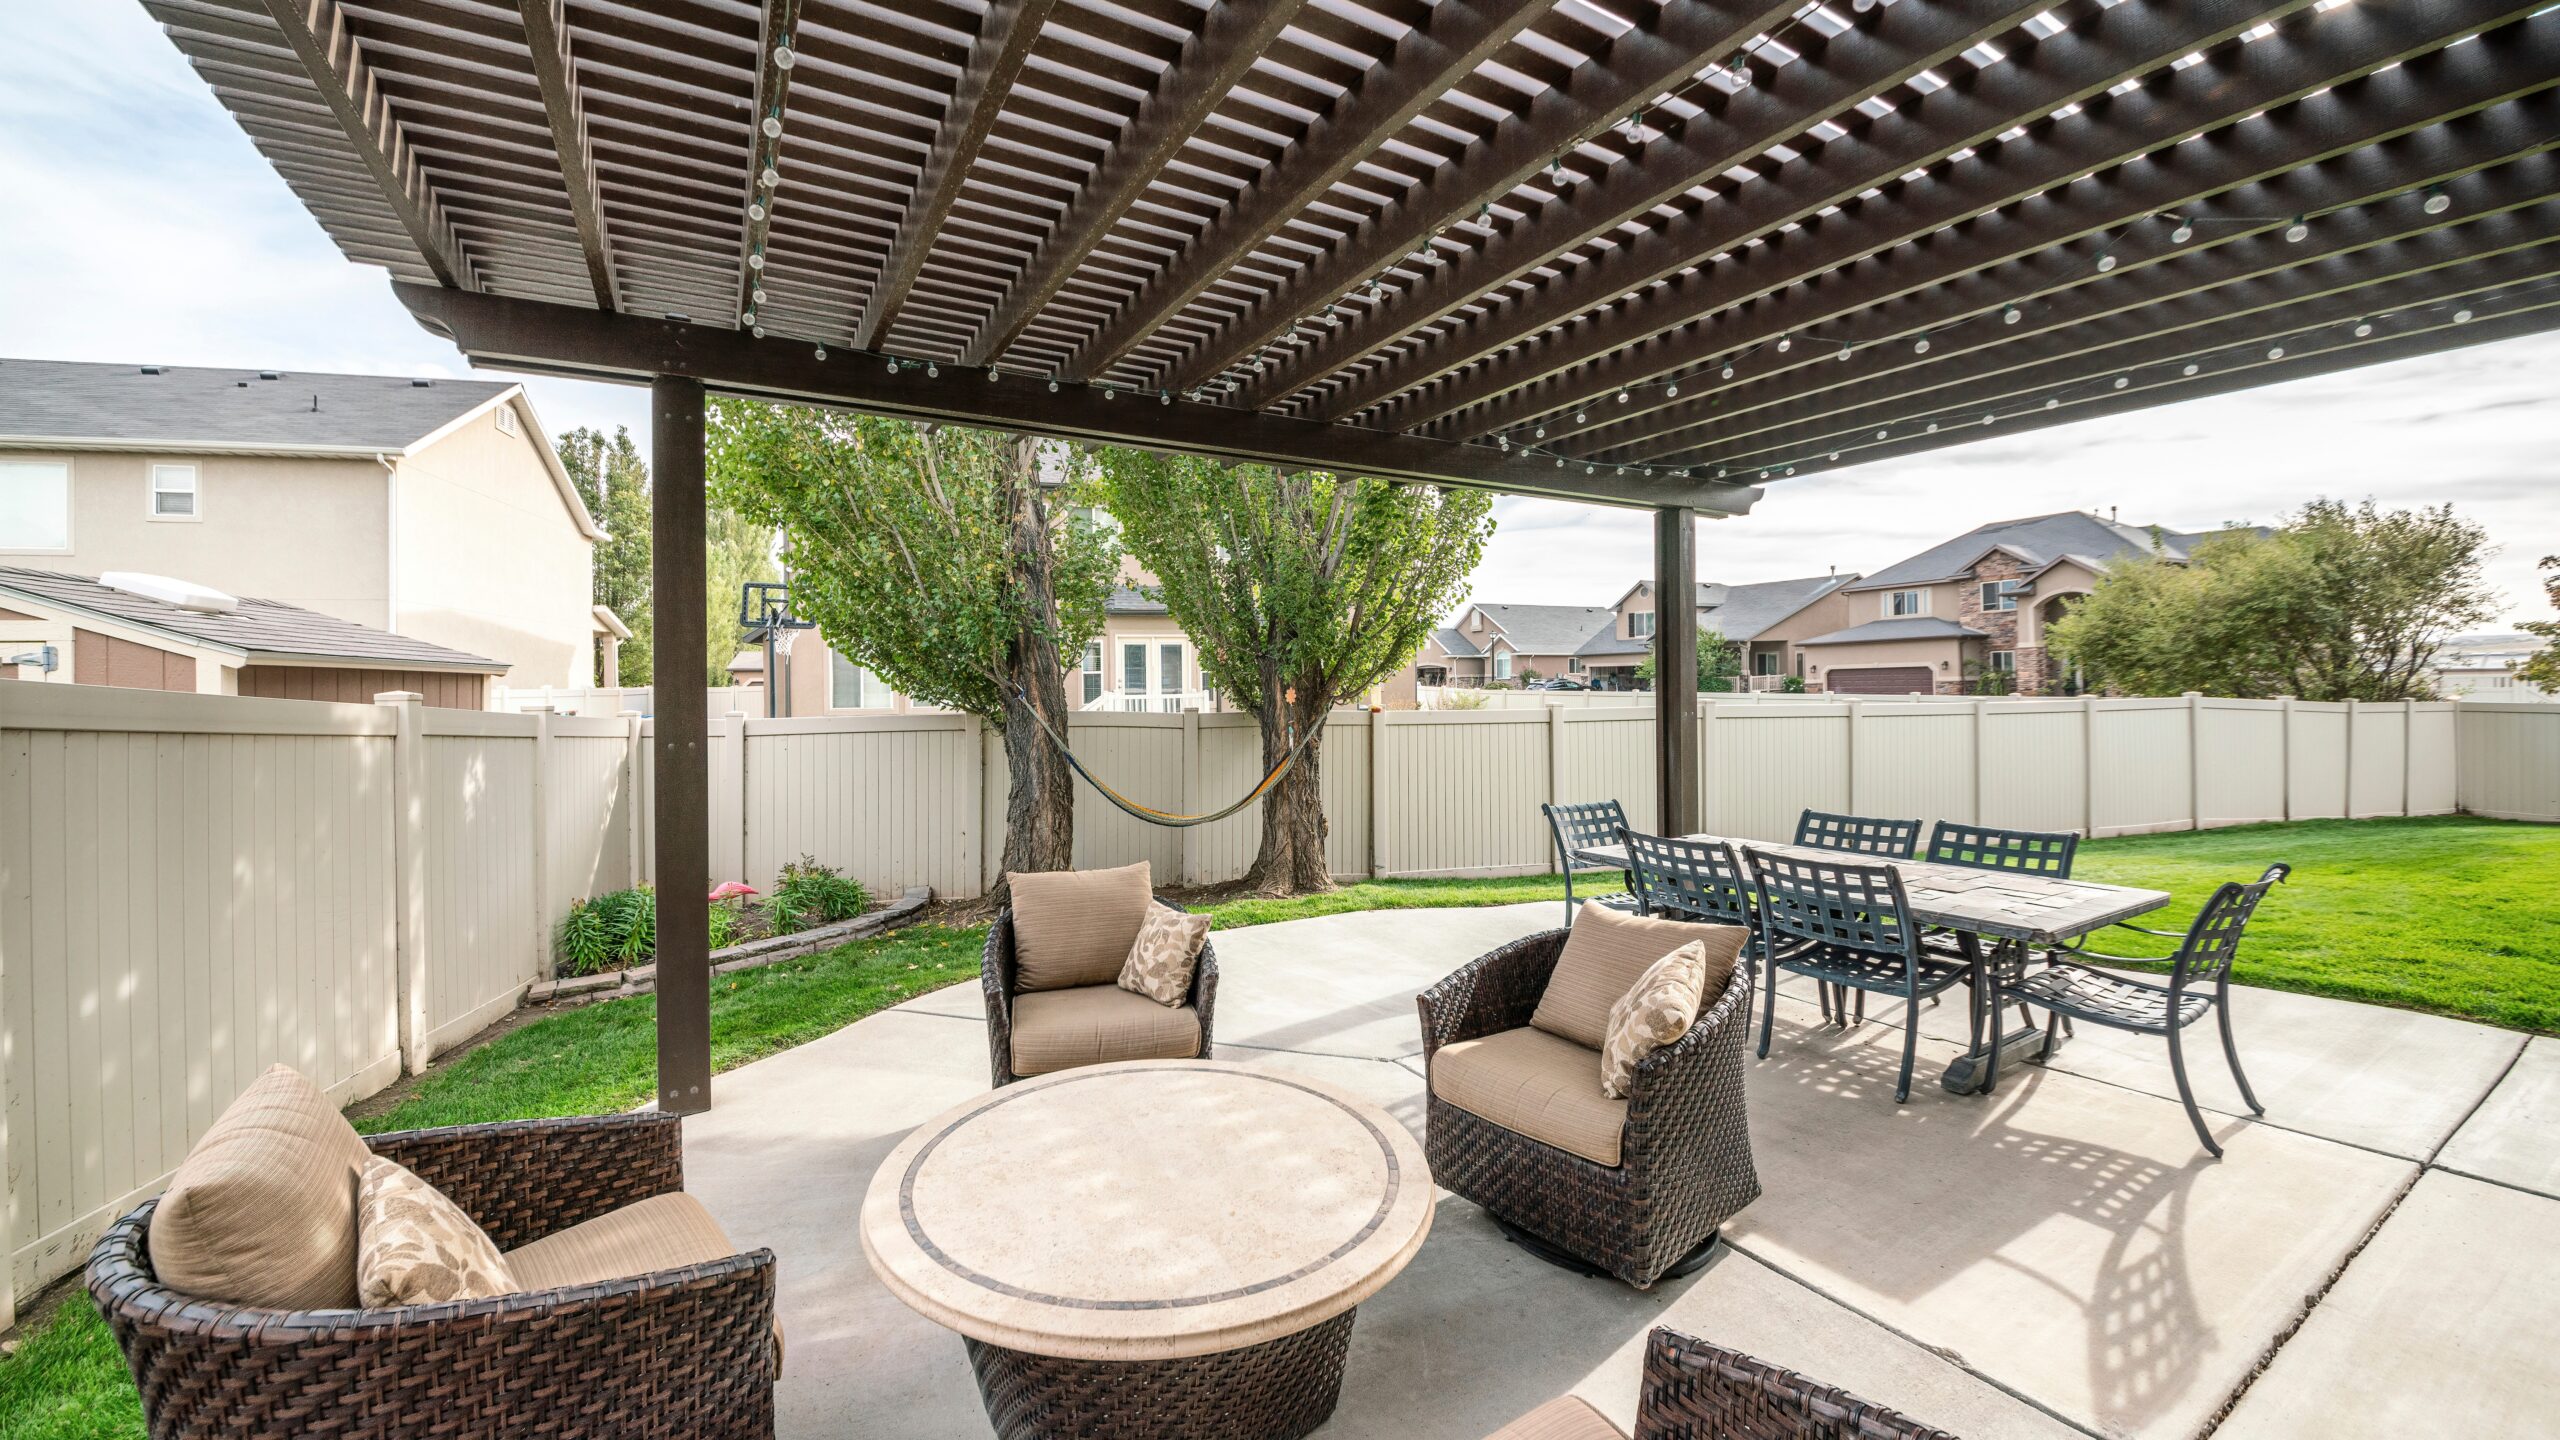 A brown pergola installed over a patio with a full outdoor dining set